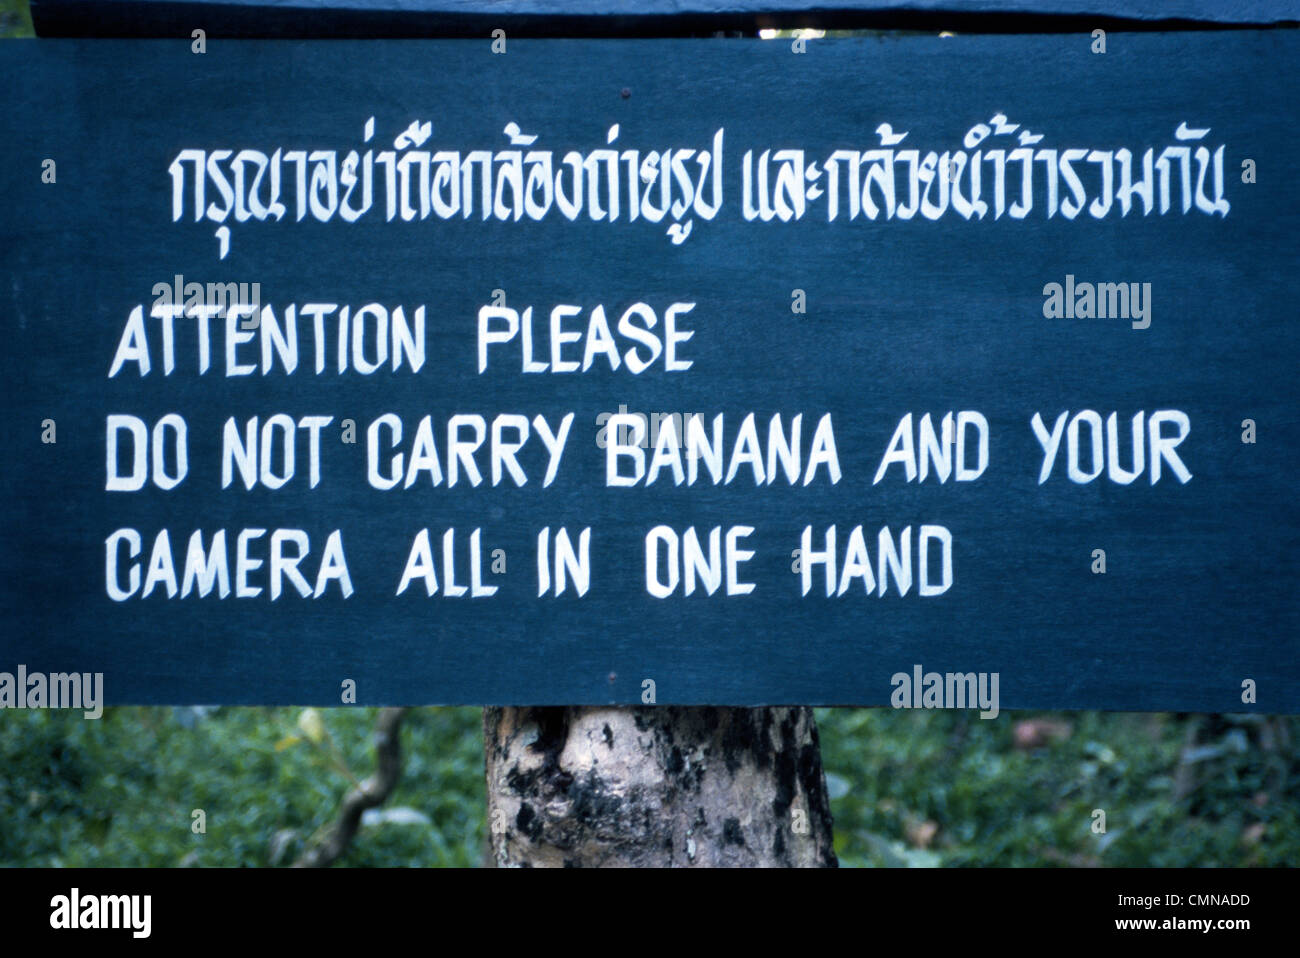 A sign in Thai and English warns tourists that elephants may grab cameras instead of bananas at an Asian elephant training center in northern Thailand. Stock Photo